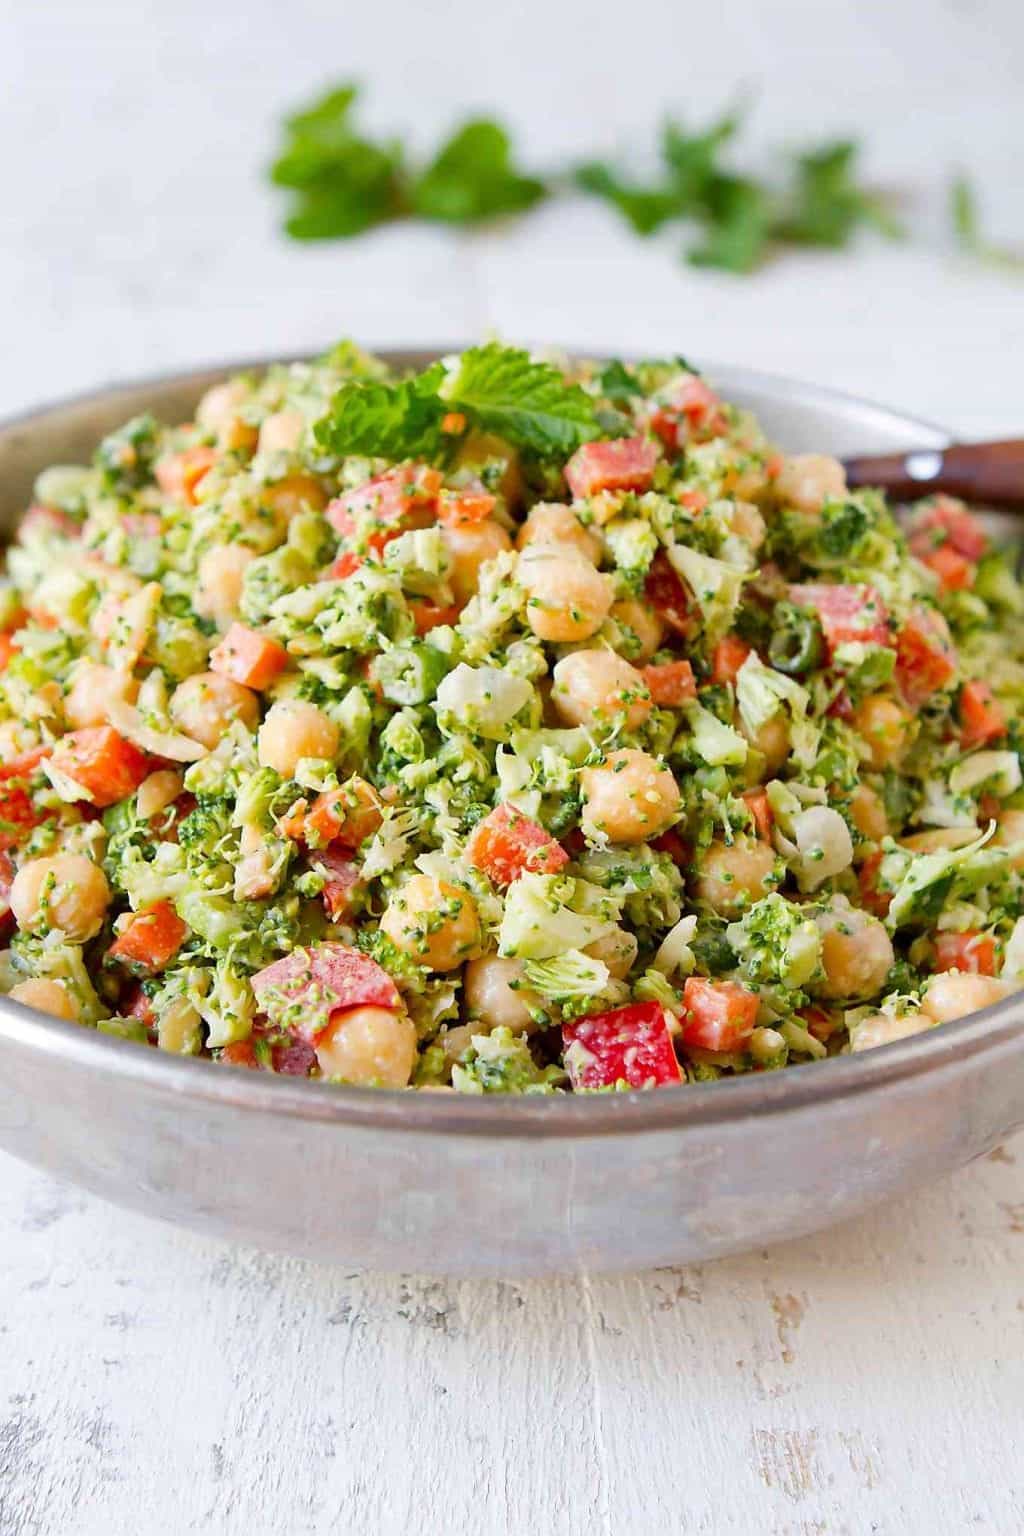 Chopped broccoli salad with chickpeas and other vegetables in a silver bowl.